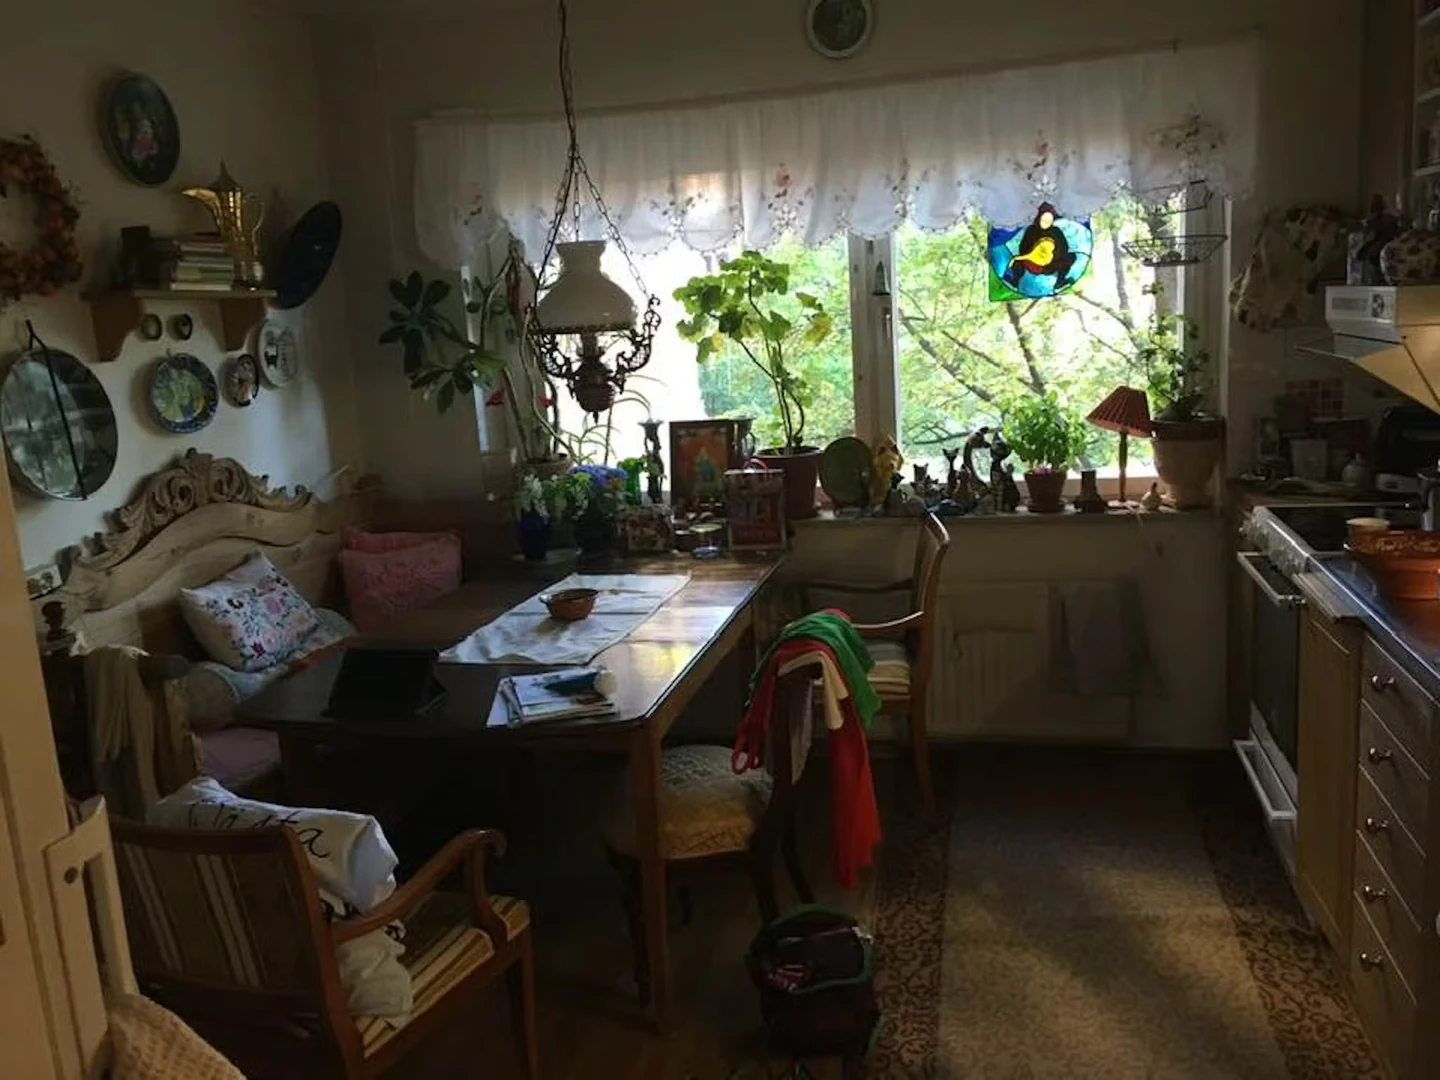 Room for rent in a shared flat in Stockholm